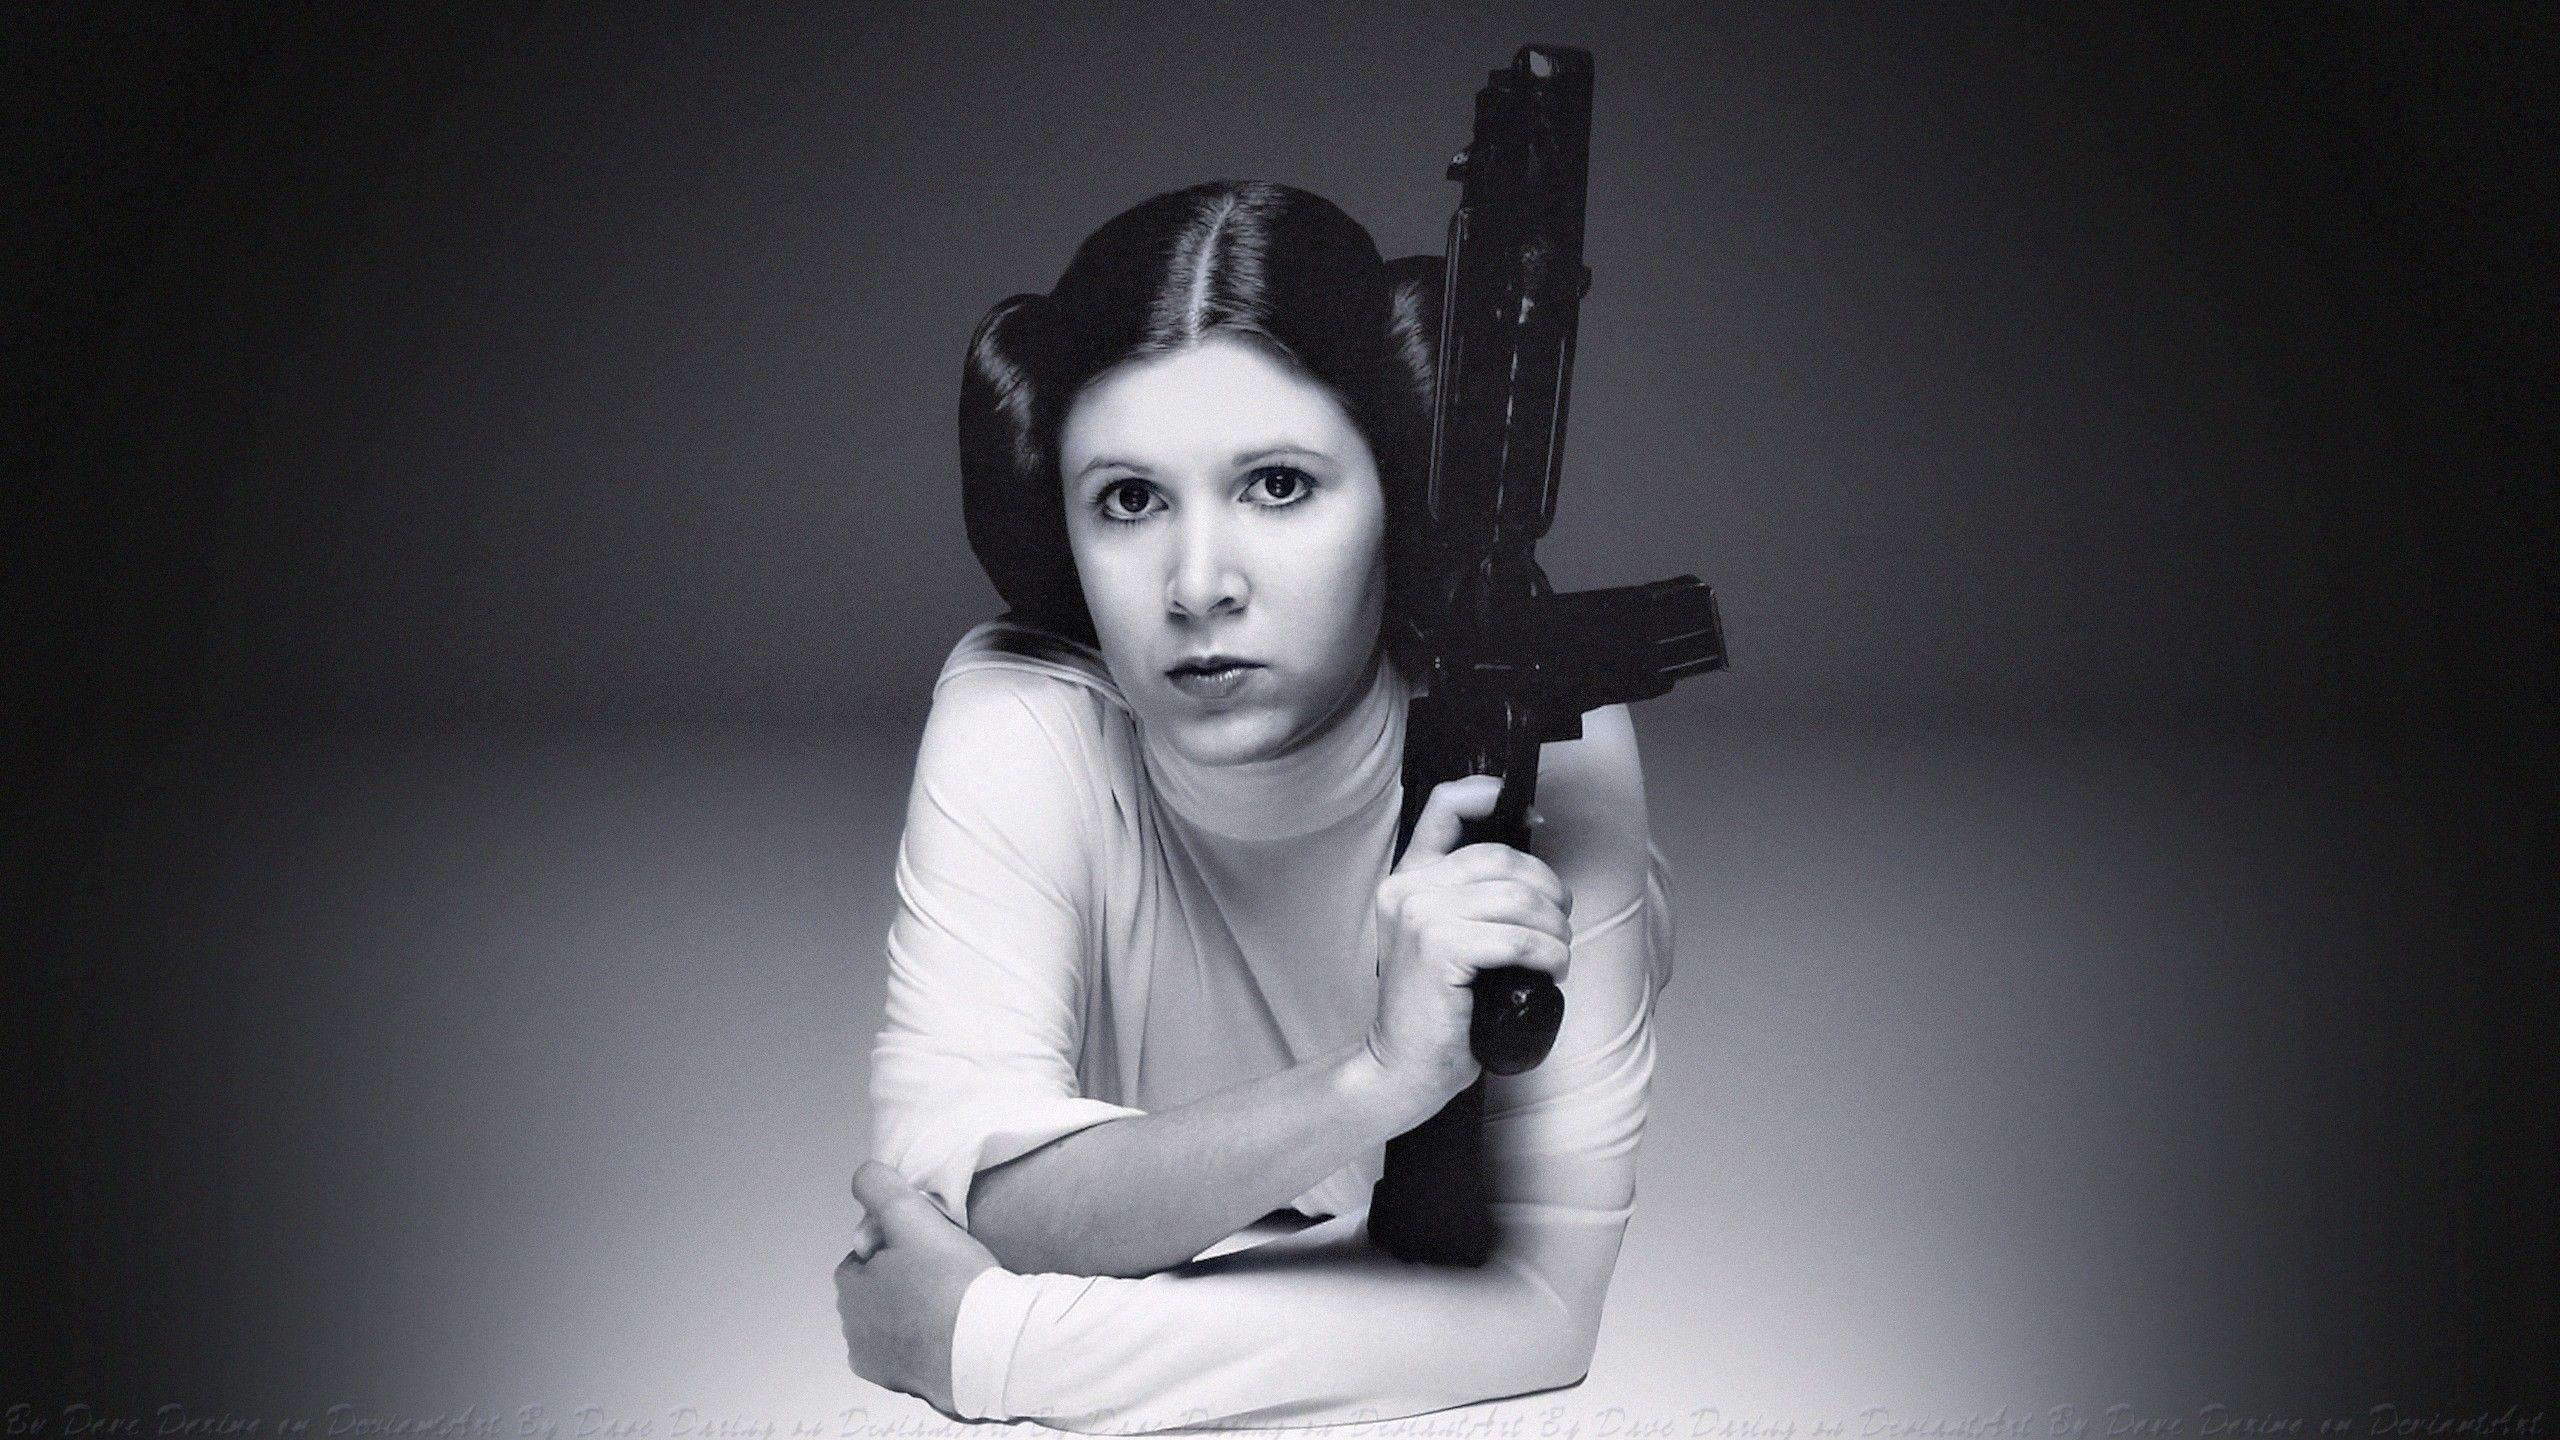 Download Princess Leia wallpapers for mobile phone free Princess Leia  HD pictures